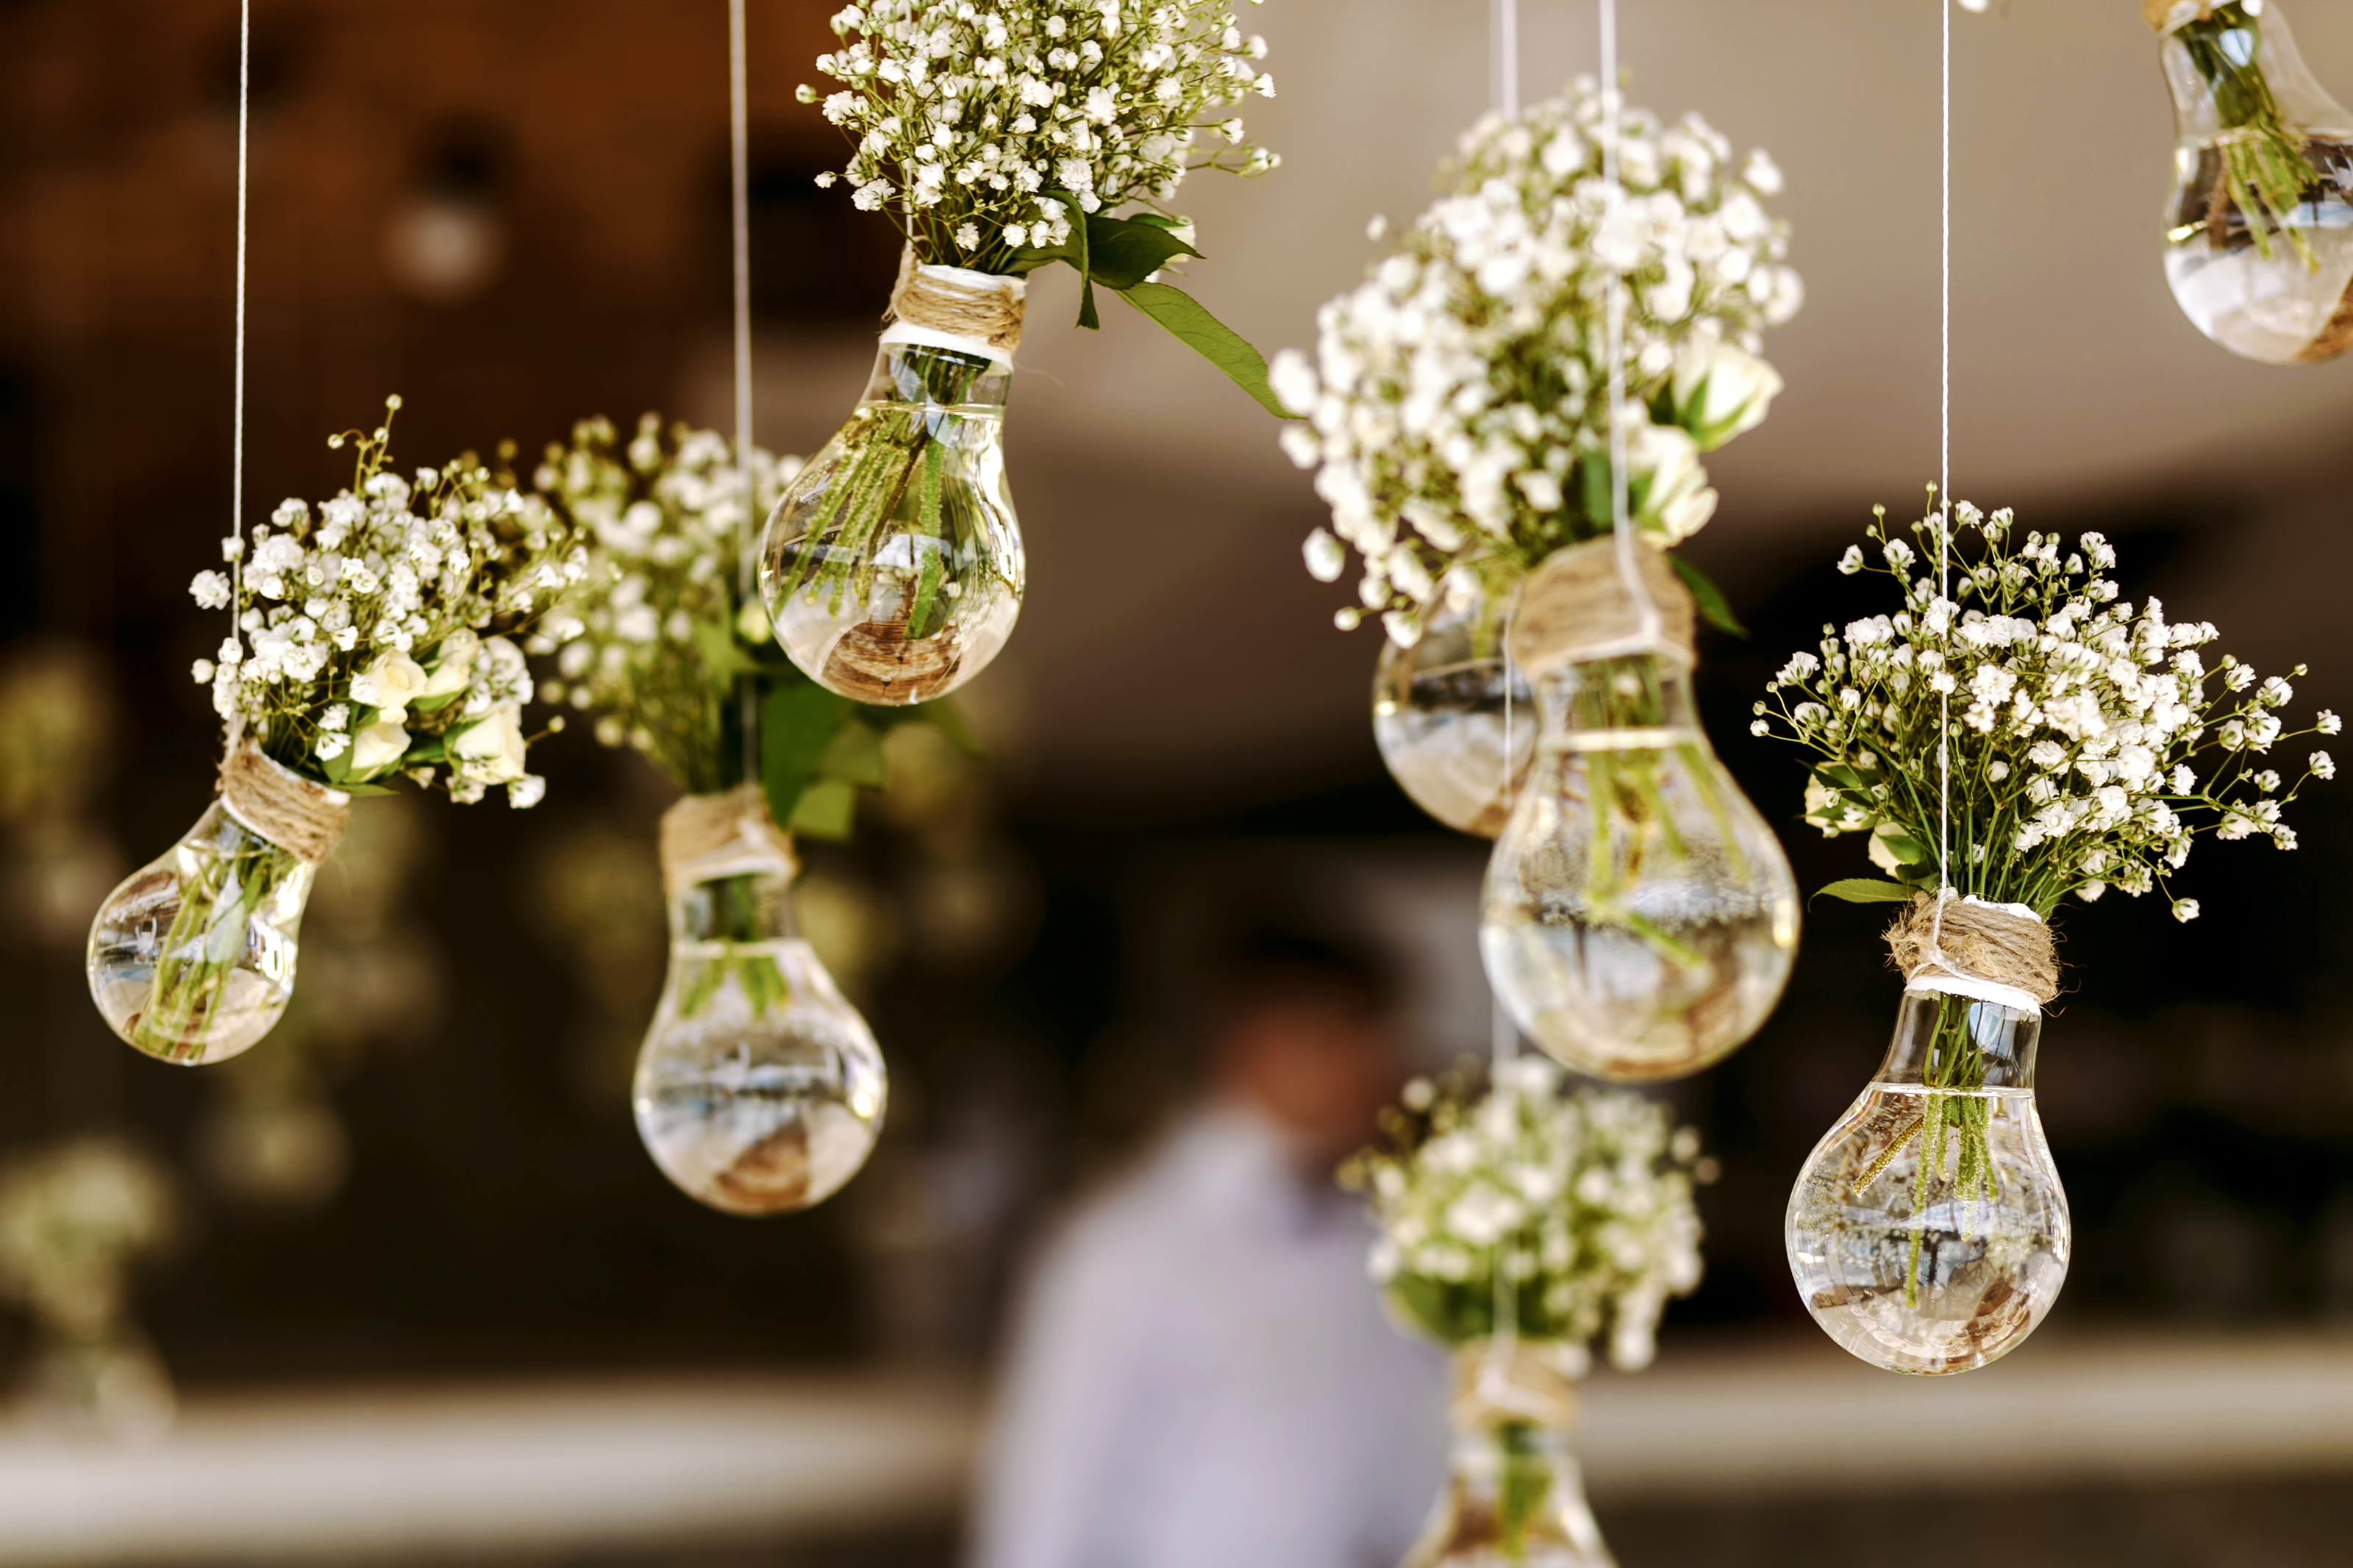 Hanging Flower vases - whether in the kitchen, the living room or outside in the garden – hanging glass containers filled with flowers and foliage add a pretty feature to your home. 